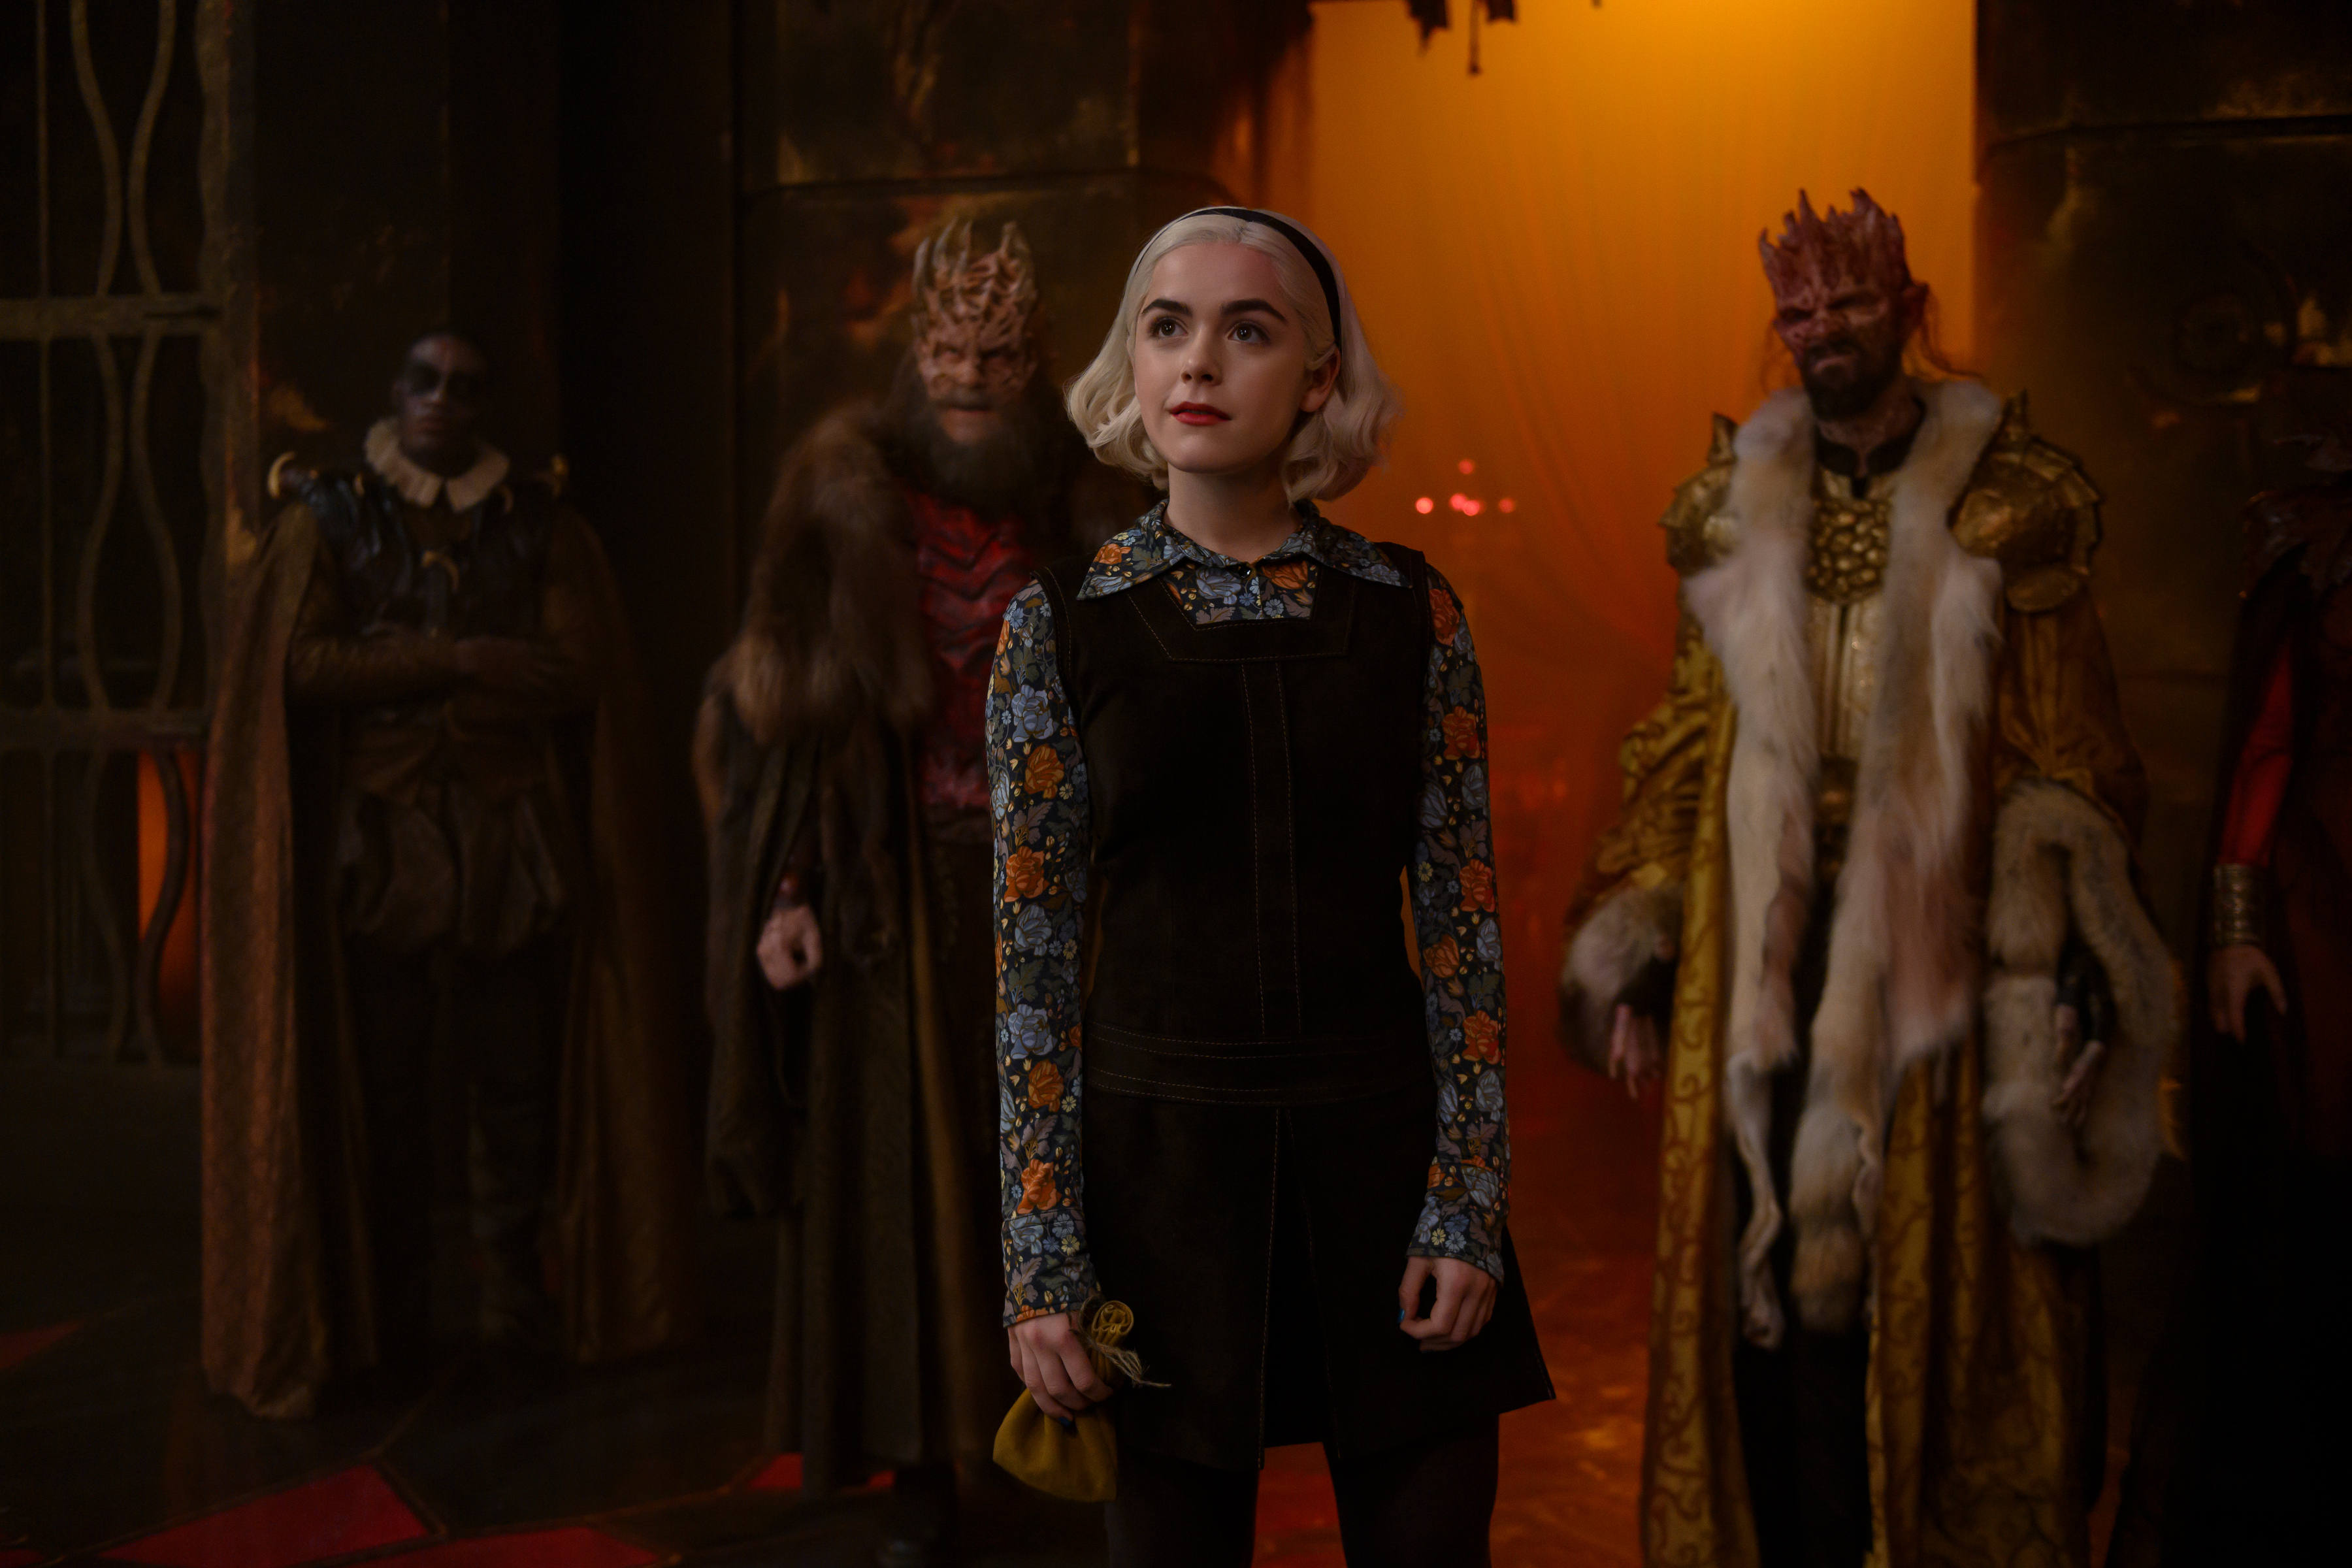 TV Show Chilling Adventures of Sabrina HD Wallpaper | Background Image